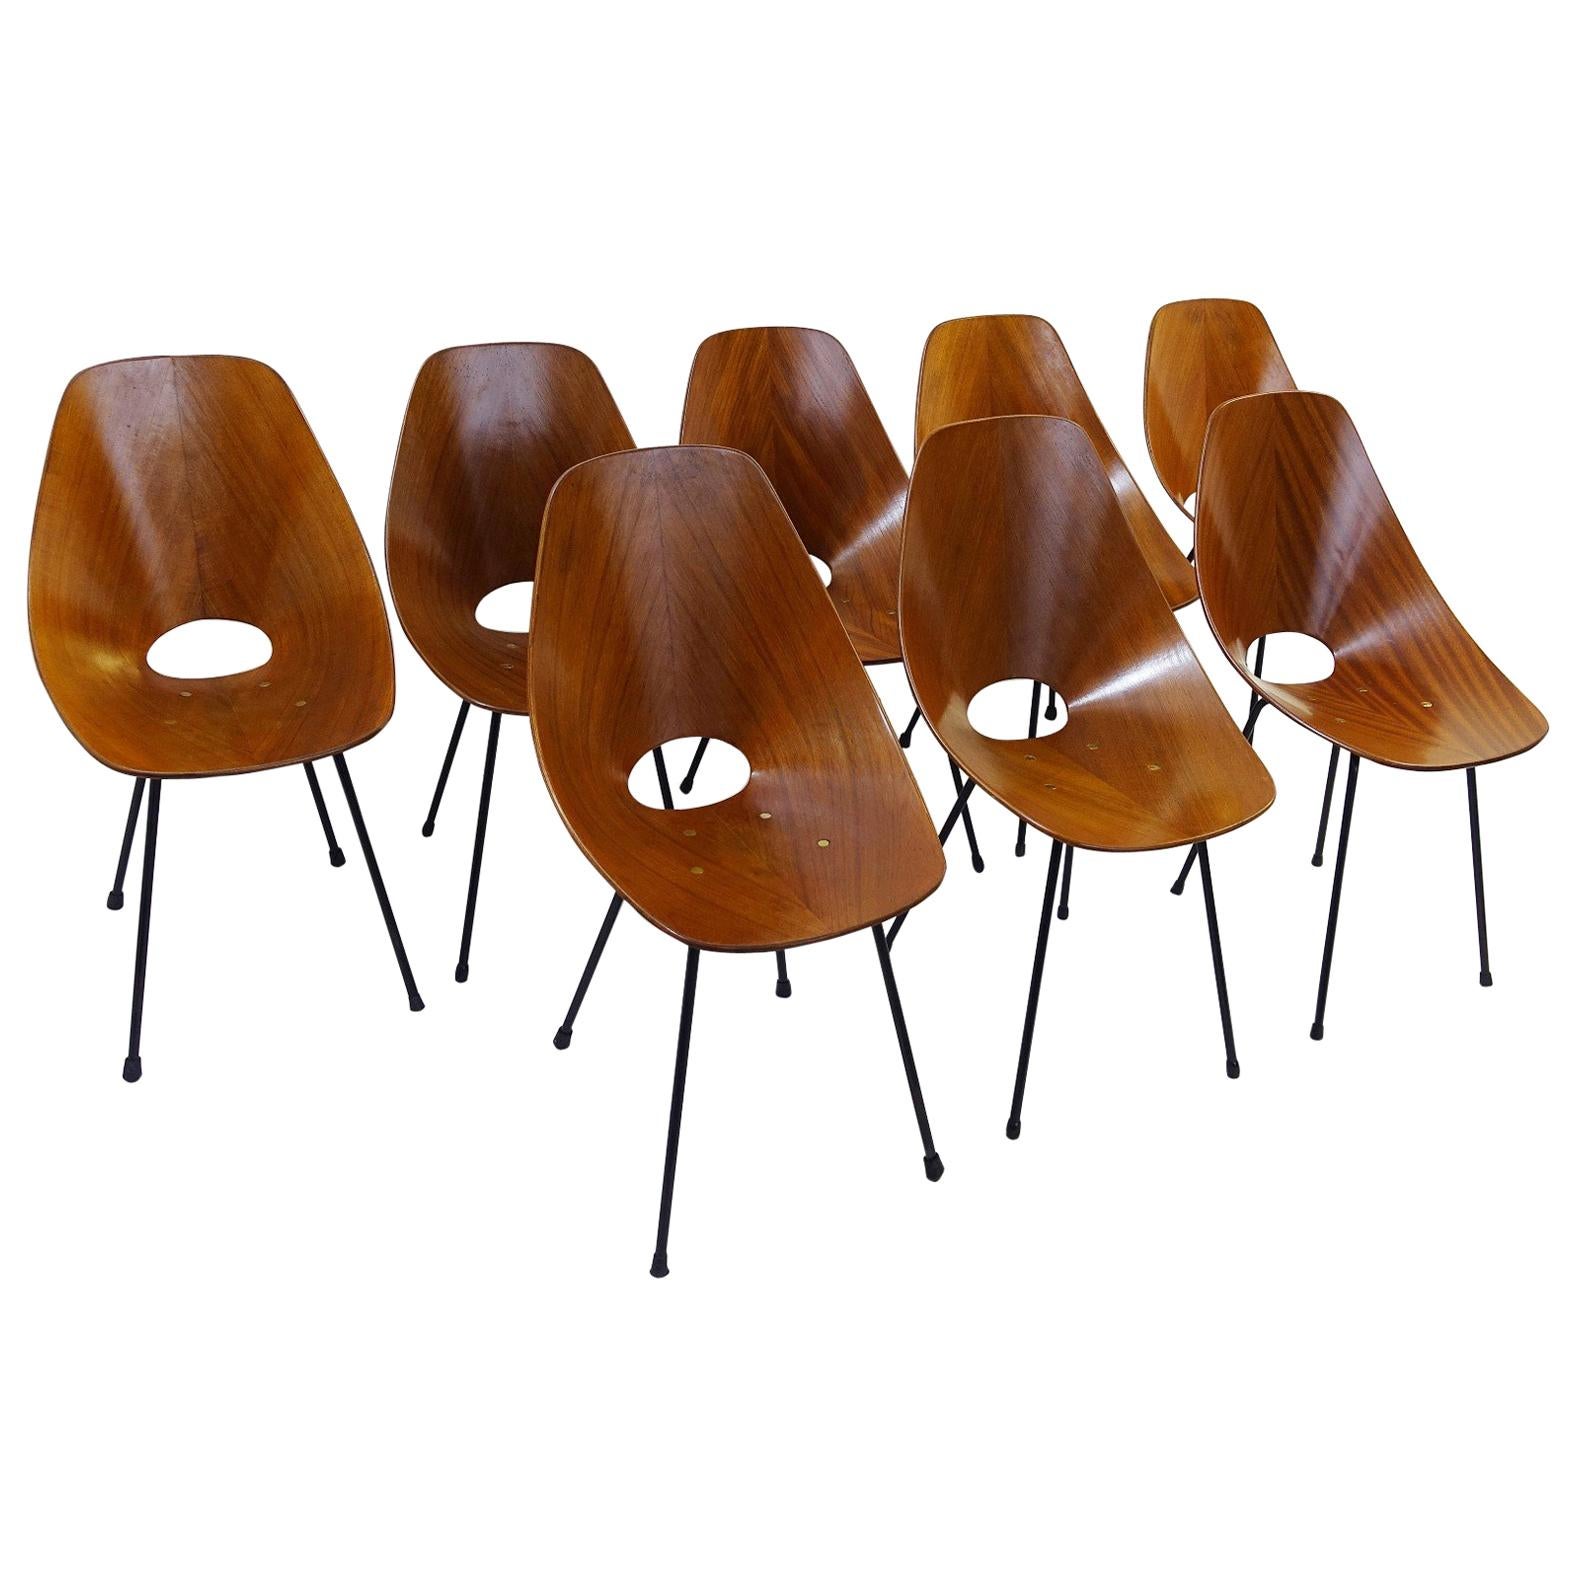 Set of Eight Medea Chairs by Vittorio Nobili for Fratelli Tagliabue, Italy, 1955